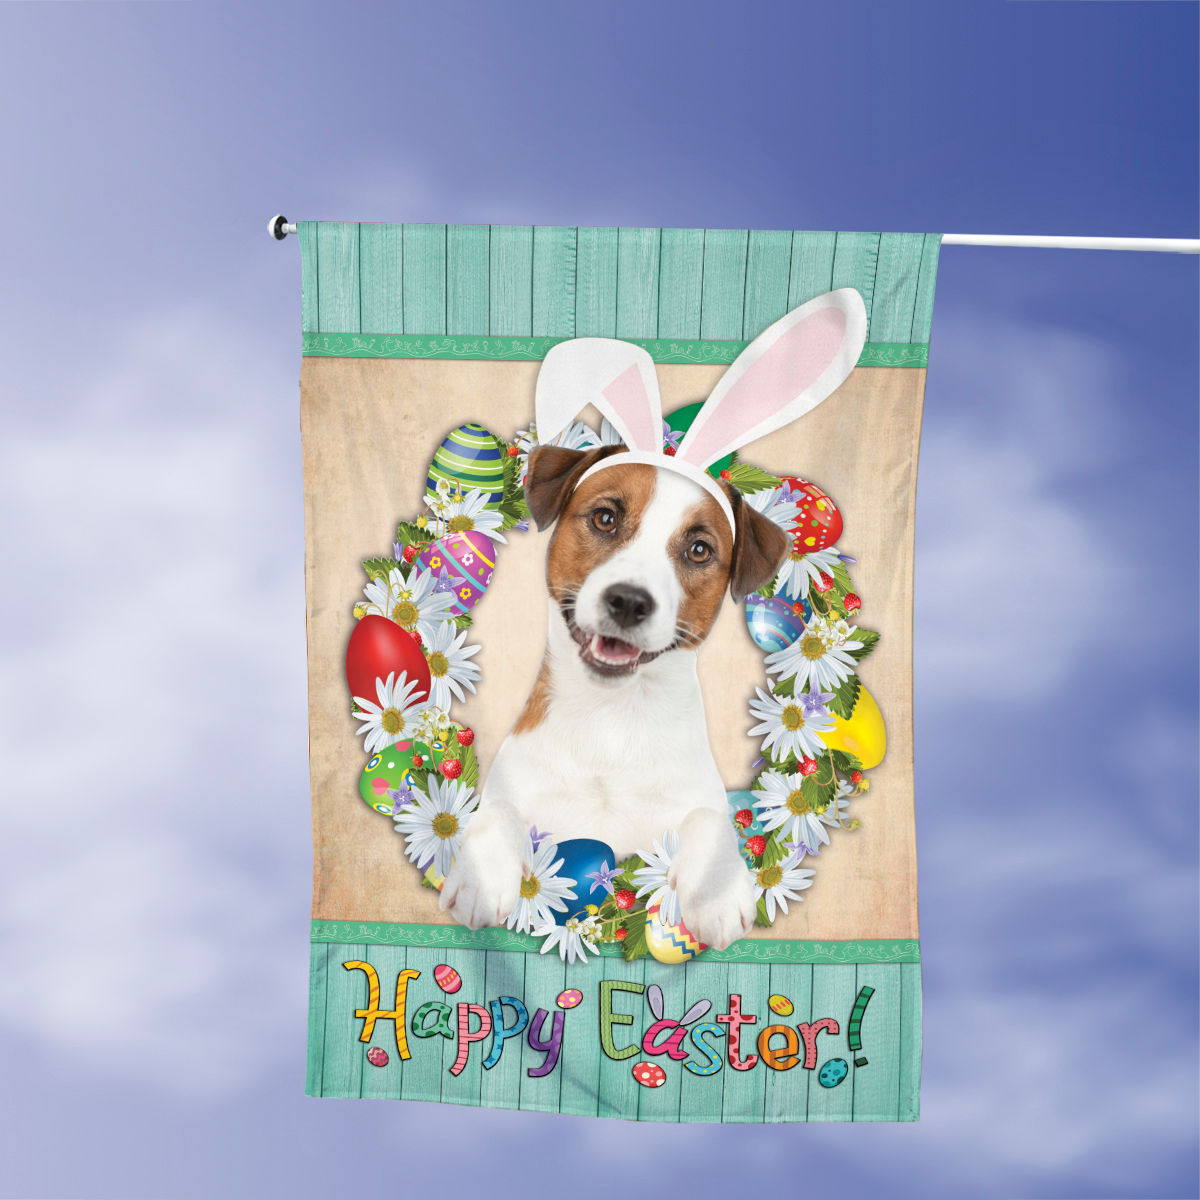 Russ Toadily Yours Easter Frog Easter Banner 27612 FREE USA SHIPPING!